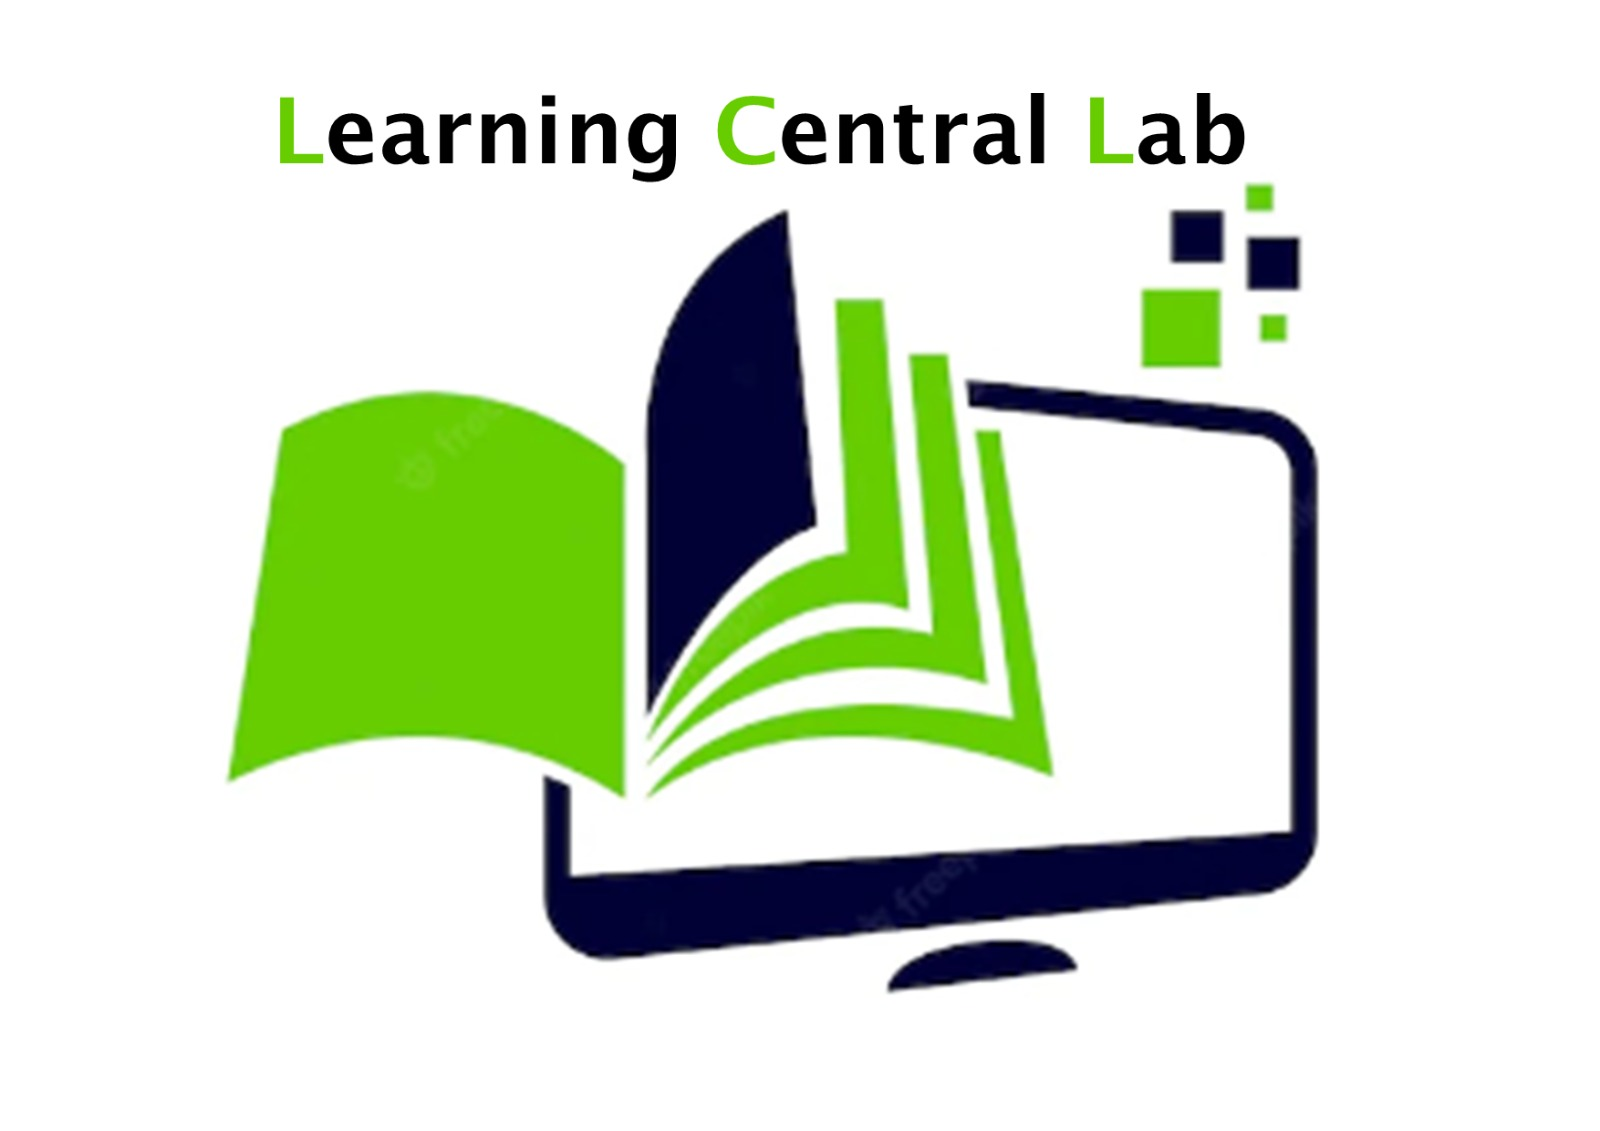 Learning Central Lab logo